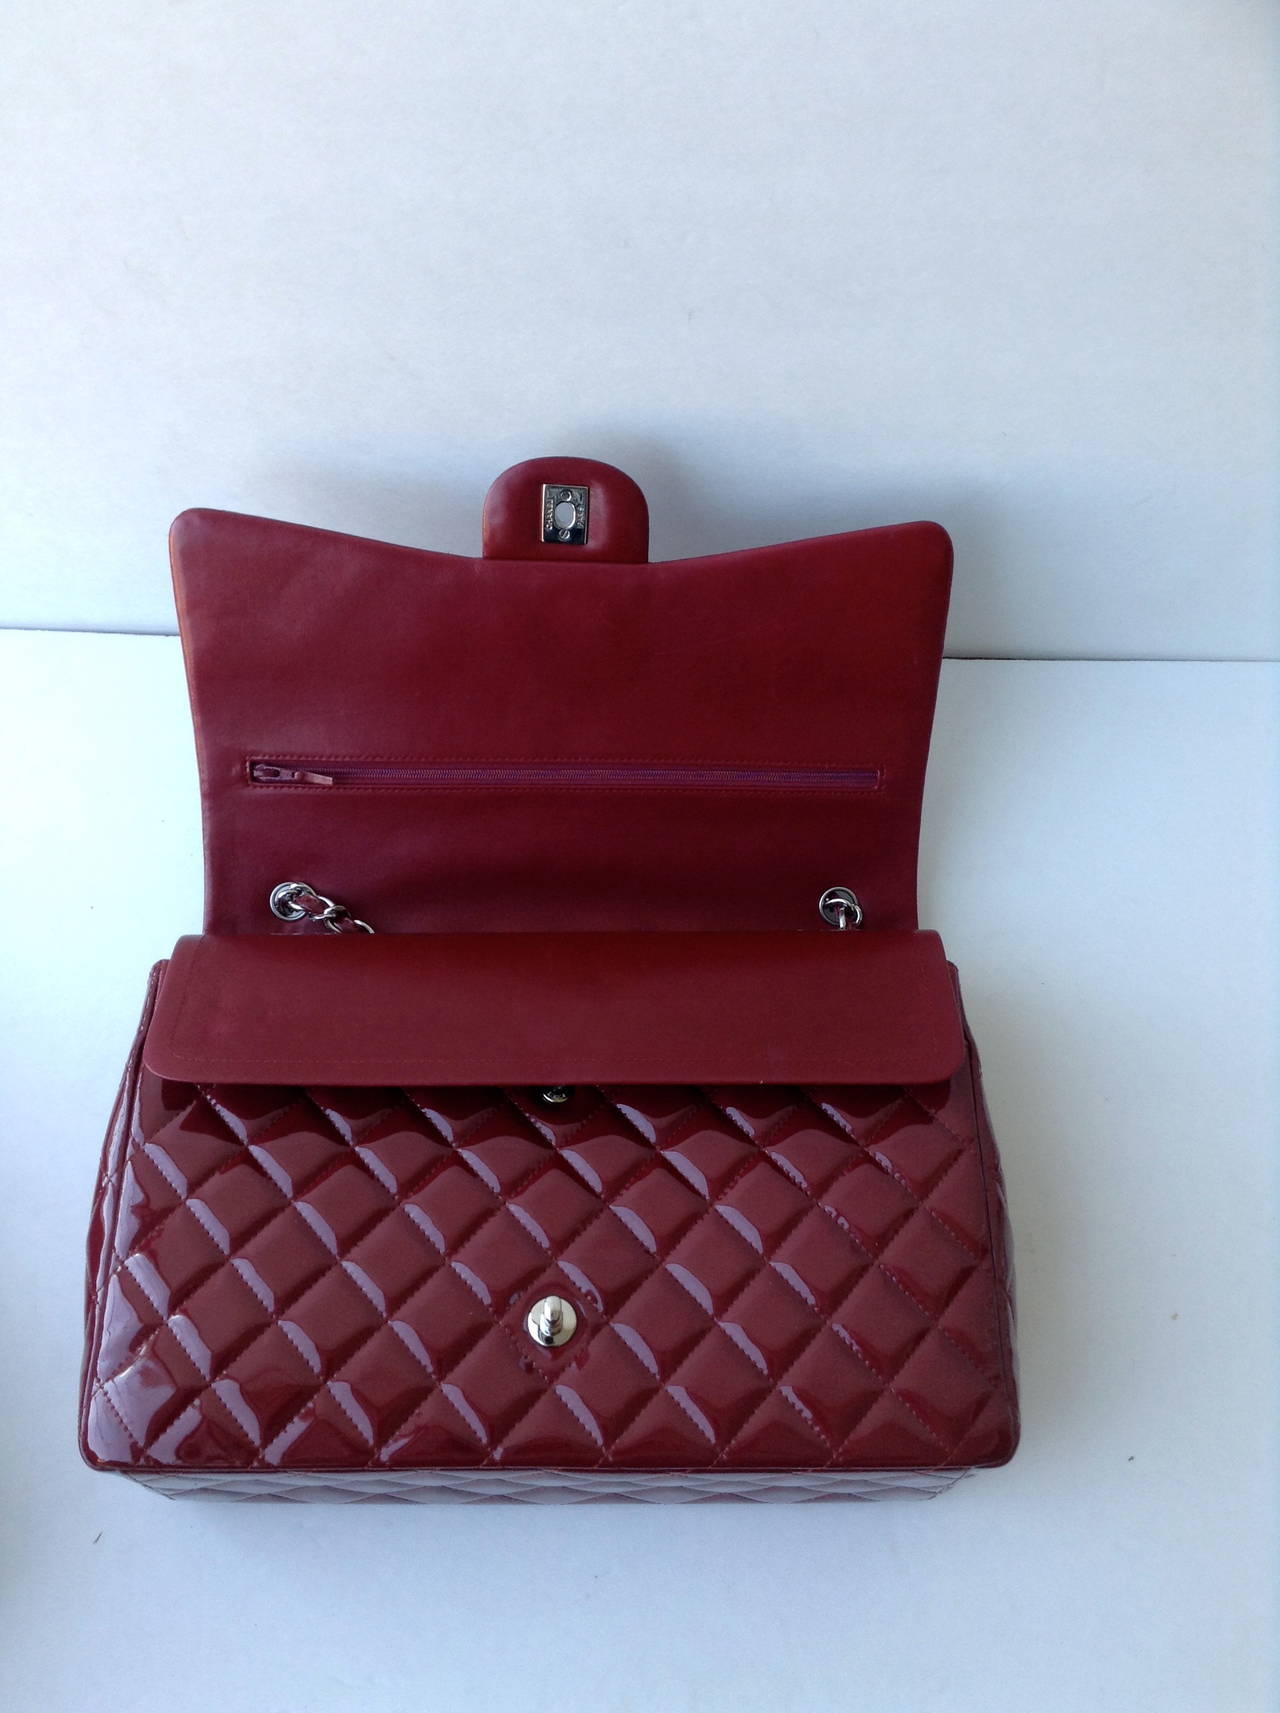 Chanel Patent Wine Red Maxi Double Flap Handbag SHW In New Condition For Sale In Westmount, Quebec